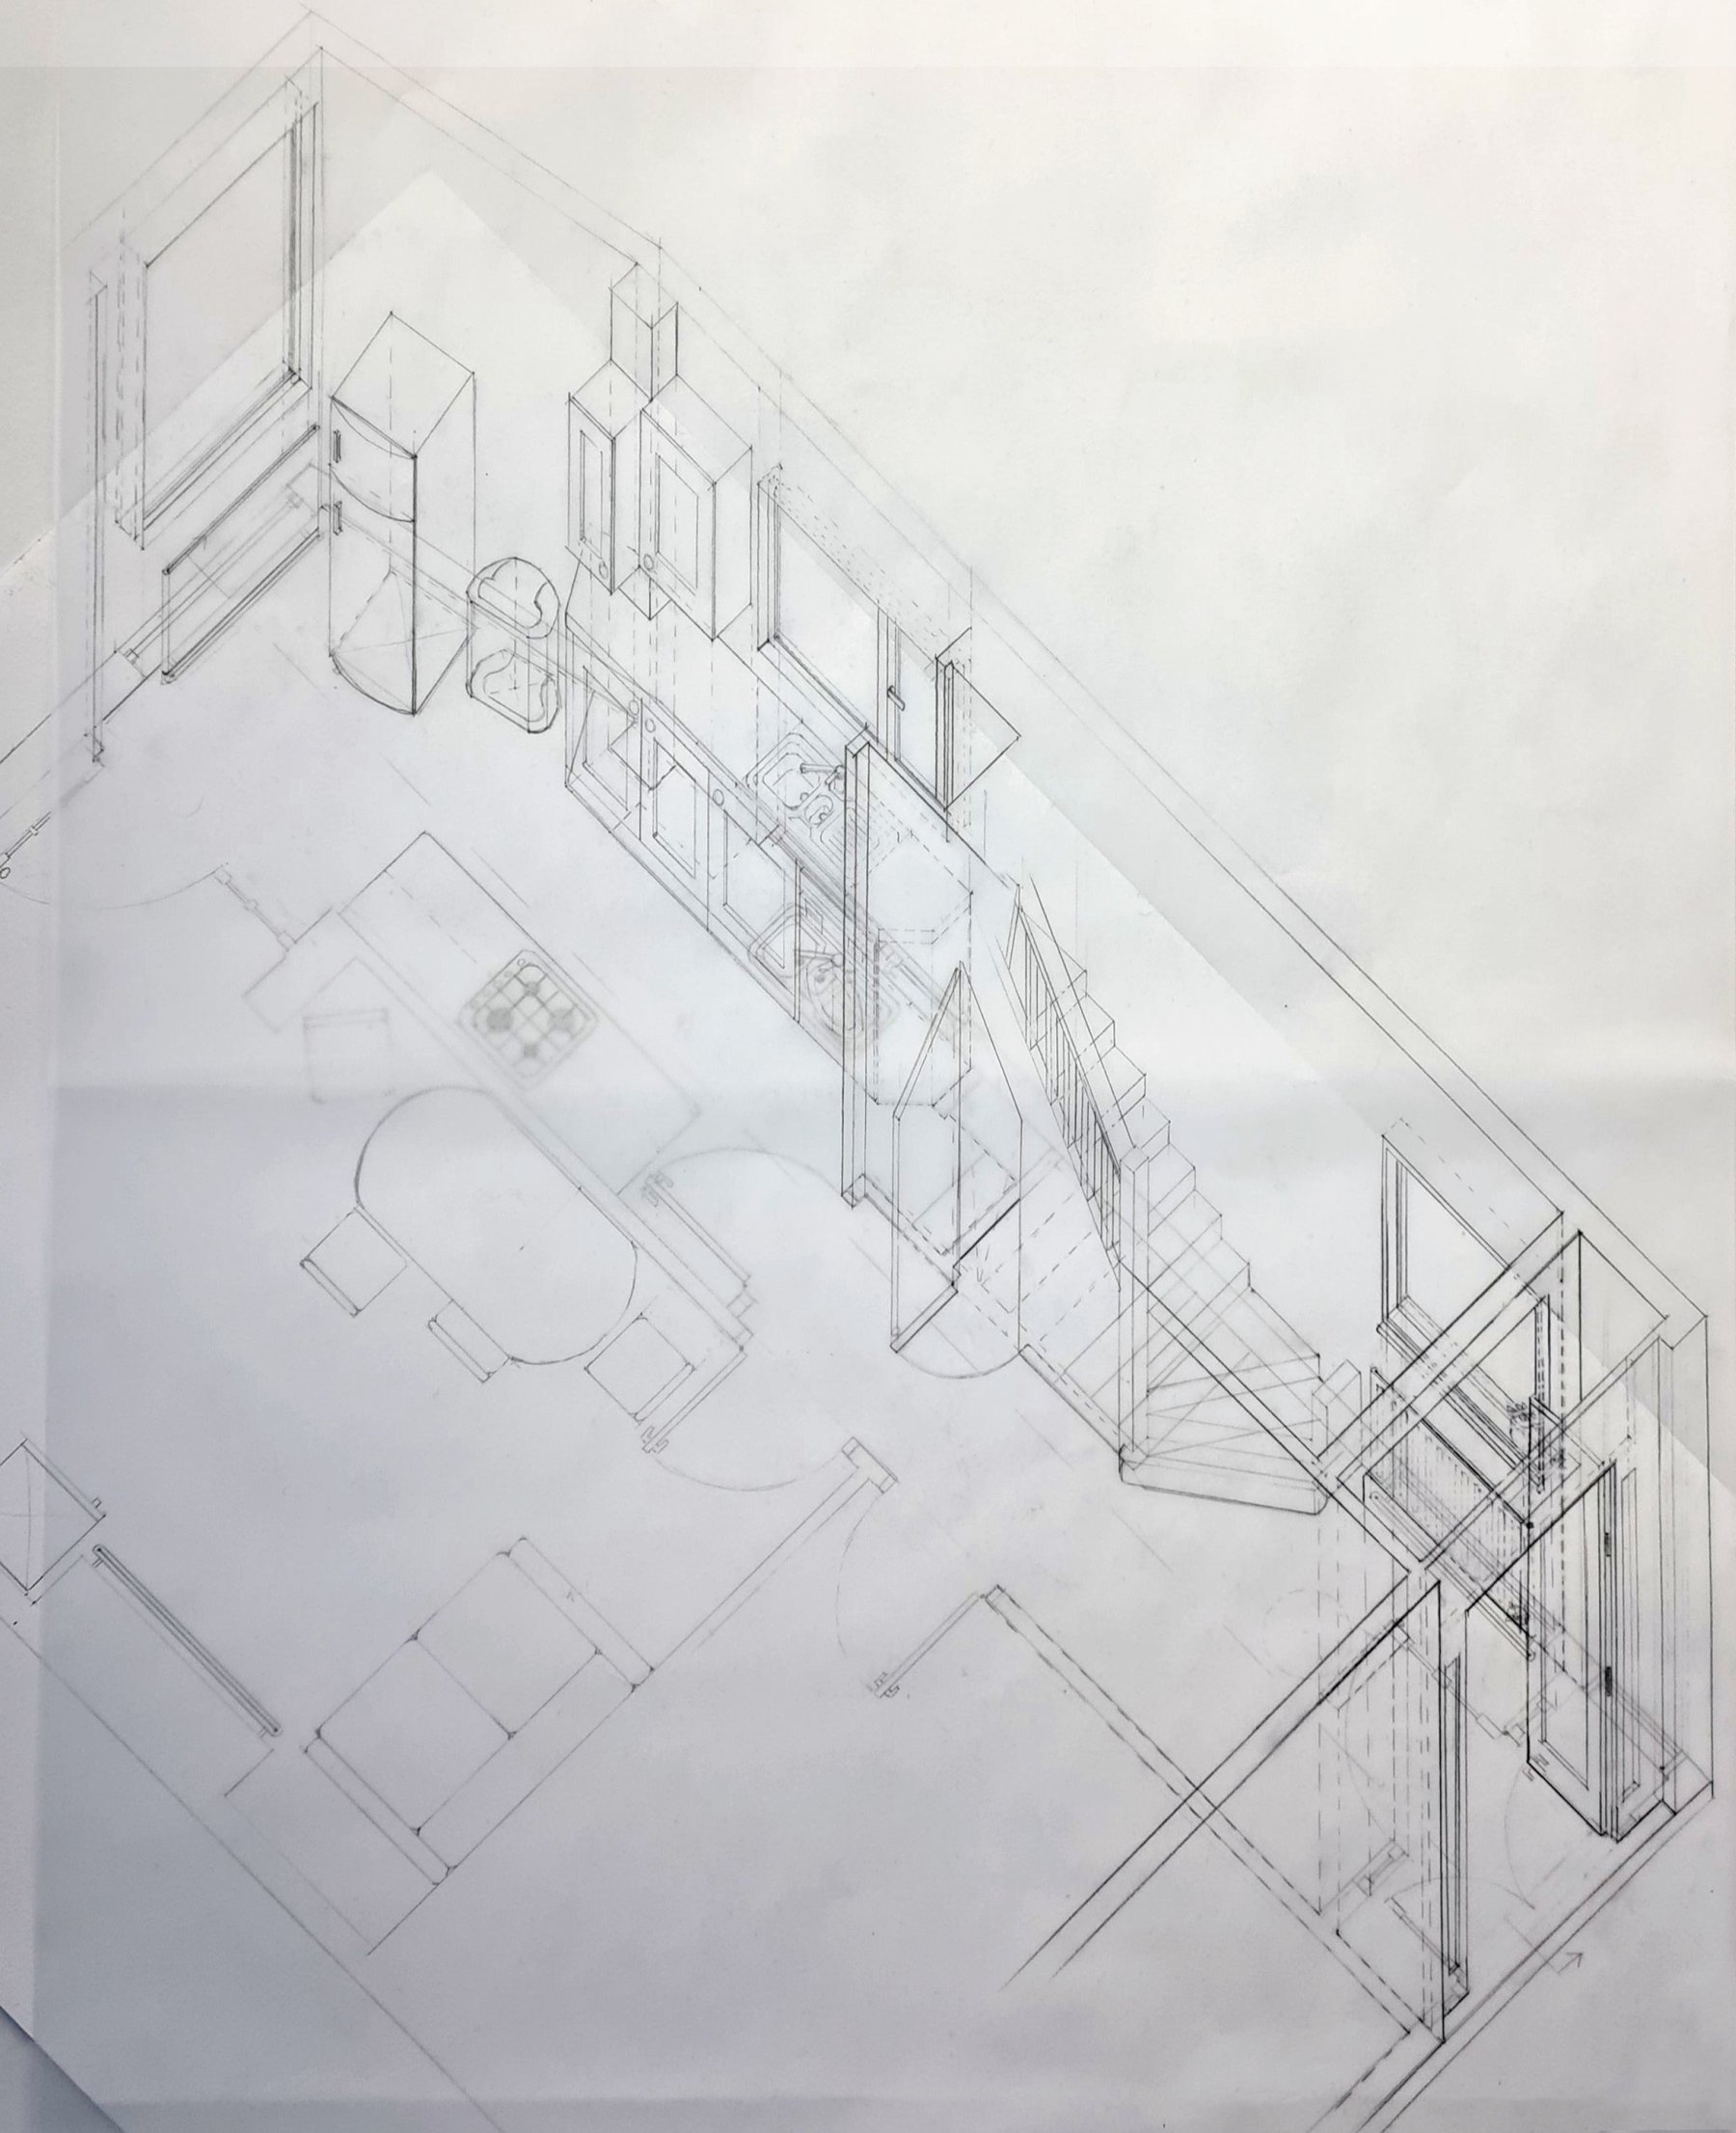 A layered axonometric drawing of a kitchen and entry into a house. Underneath the upper layer one can see the plan on which the axonometric drawing was constructed